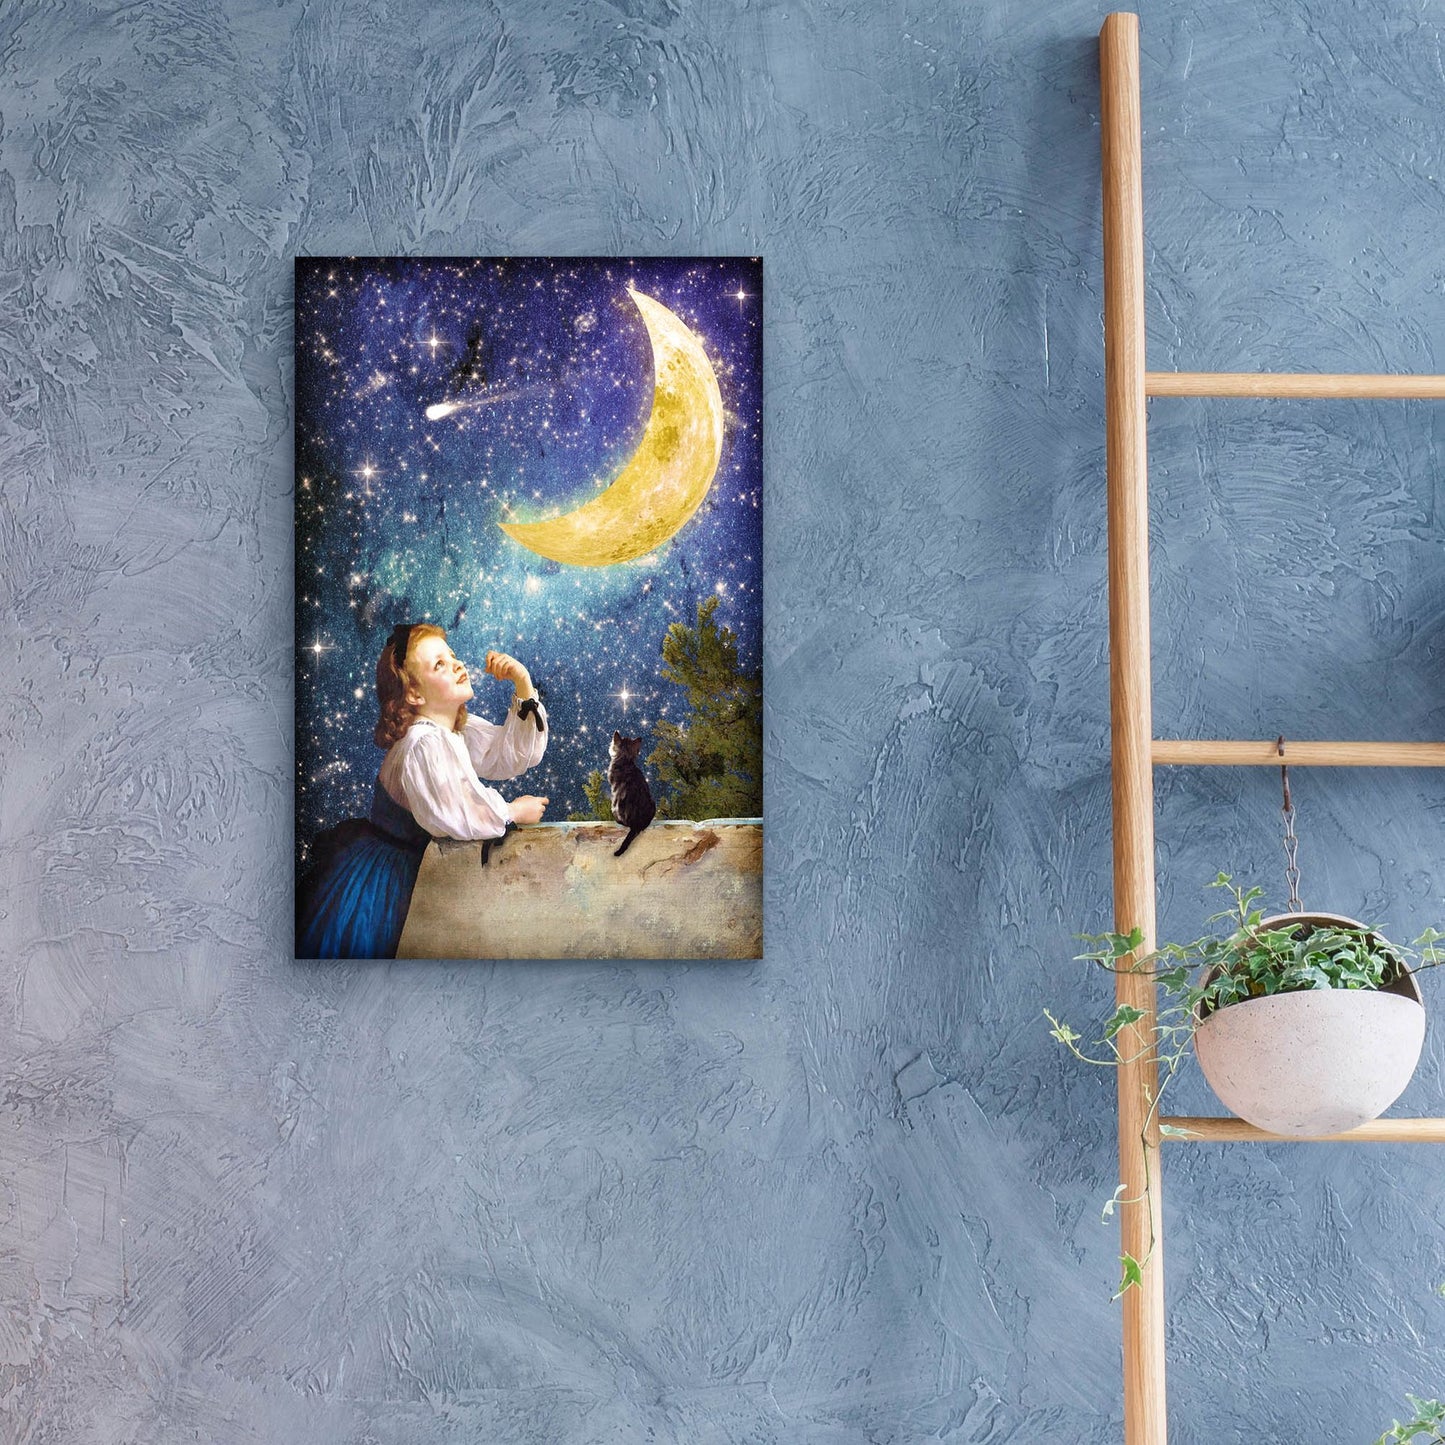 Epic Art 'One Wish Upon the Moon' by Diogo Verissimo, Acrylic Glass Wall Art,16x24